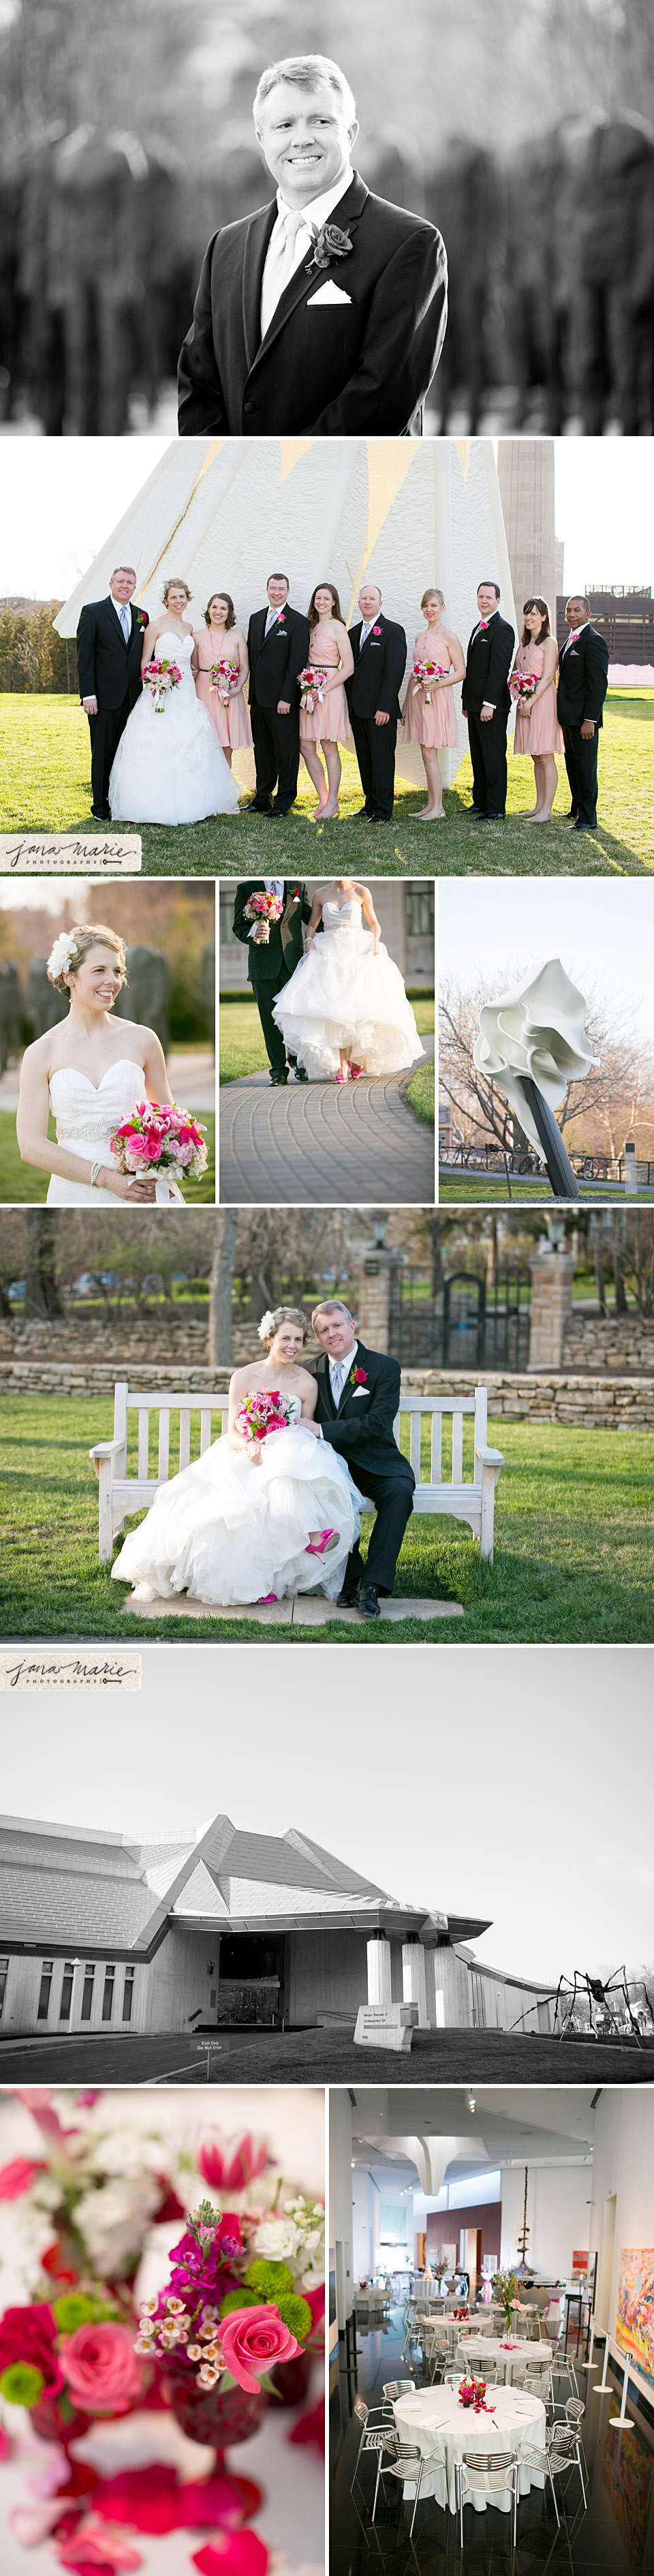 Bride and groom portraits, Bridal party, fun photography, KC wedding day, spring weddings, Nelson Art Museum